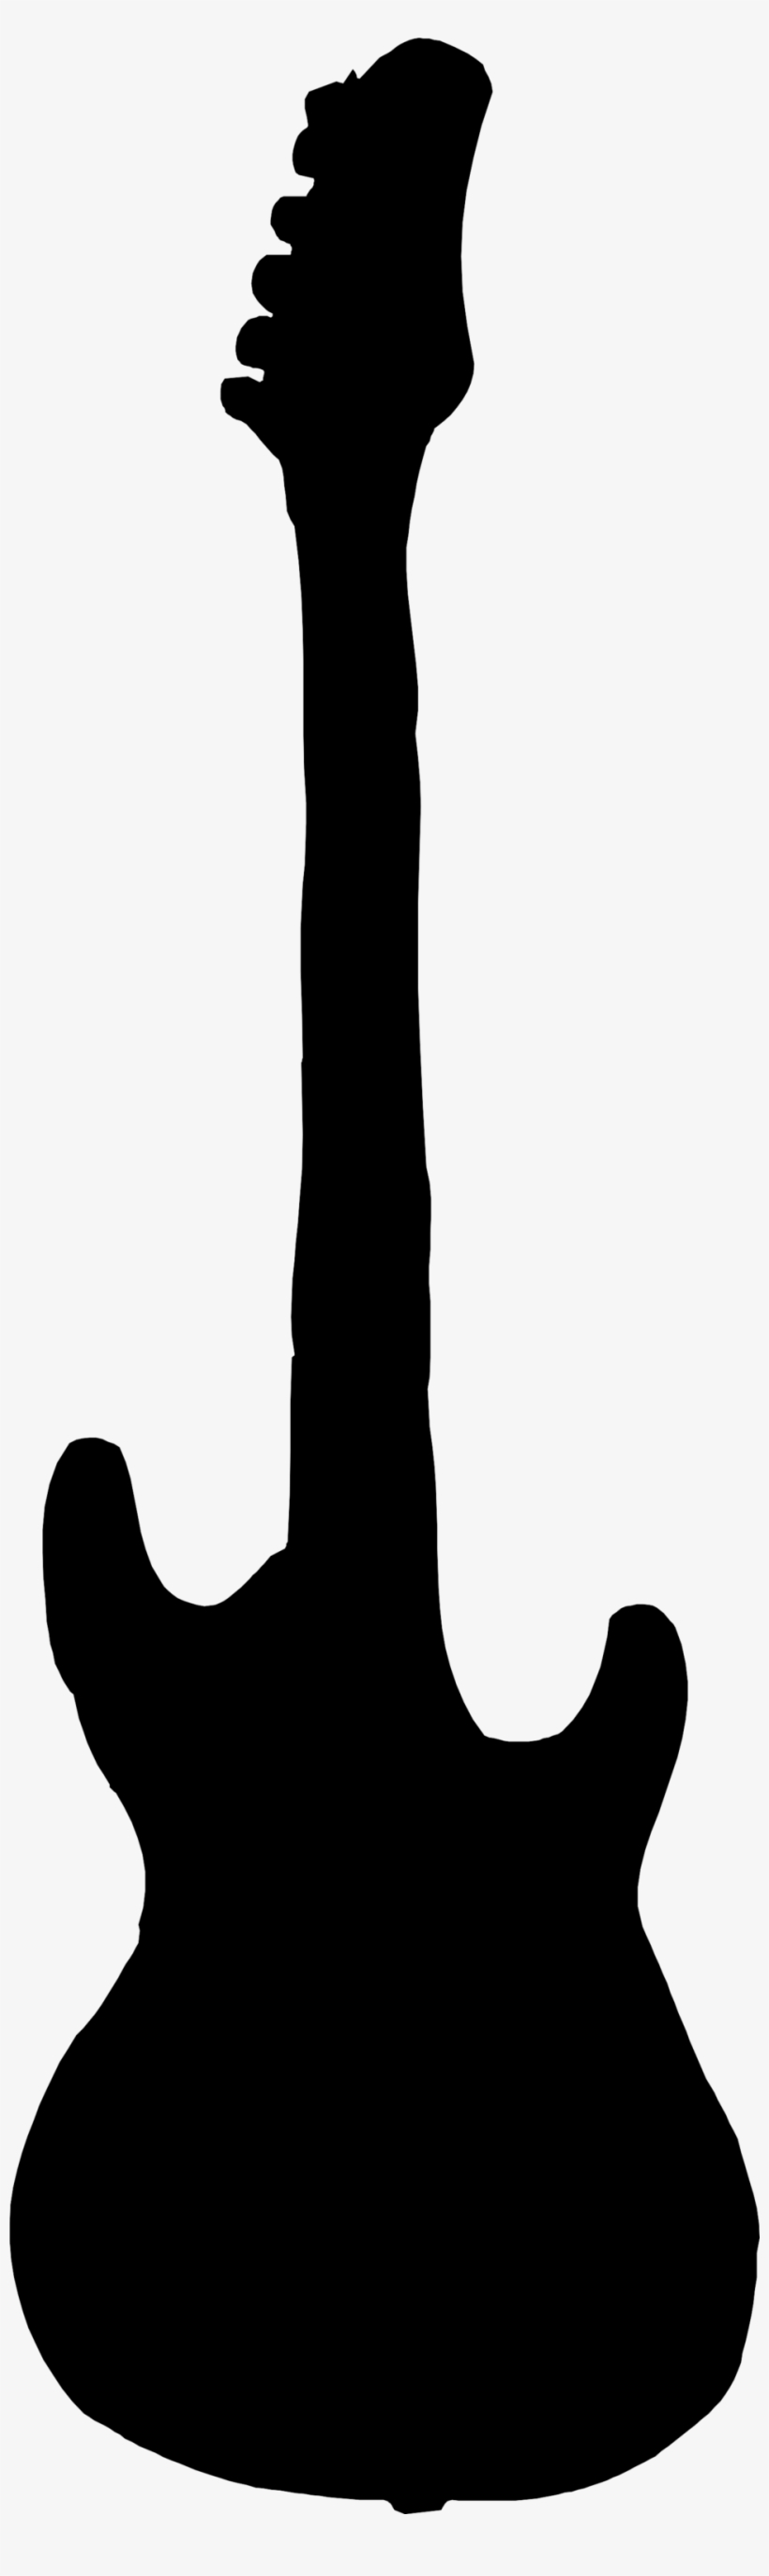 Electric Guitar Silhouette Vector Free - Bass Guitar Silhouette Png, transparent png #3765093